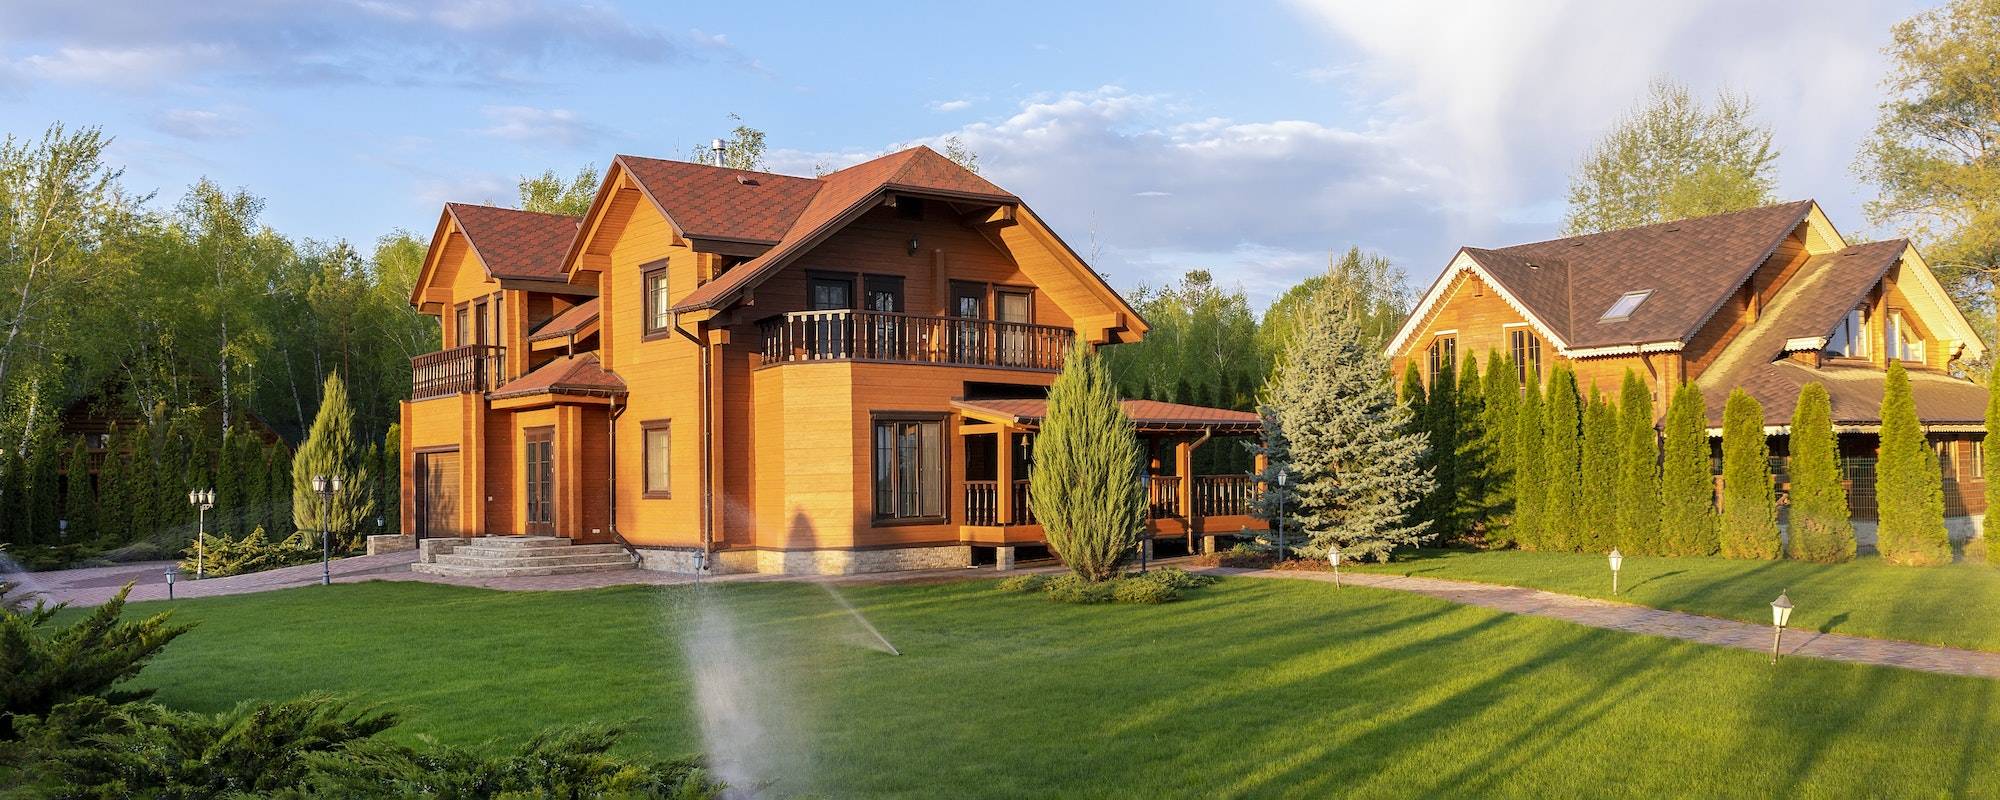 Modern wooden eco house villa facade luxury big house. Timber cottage with with green lawn water